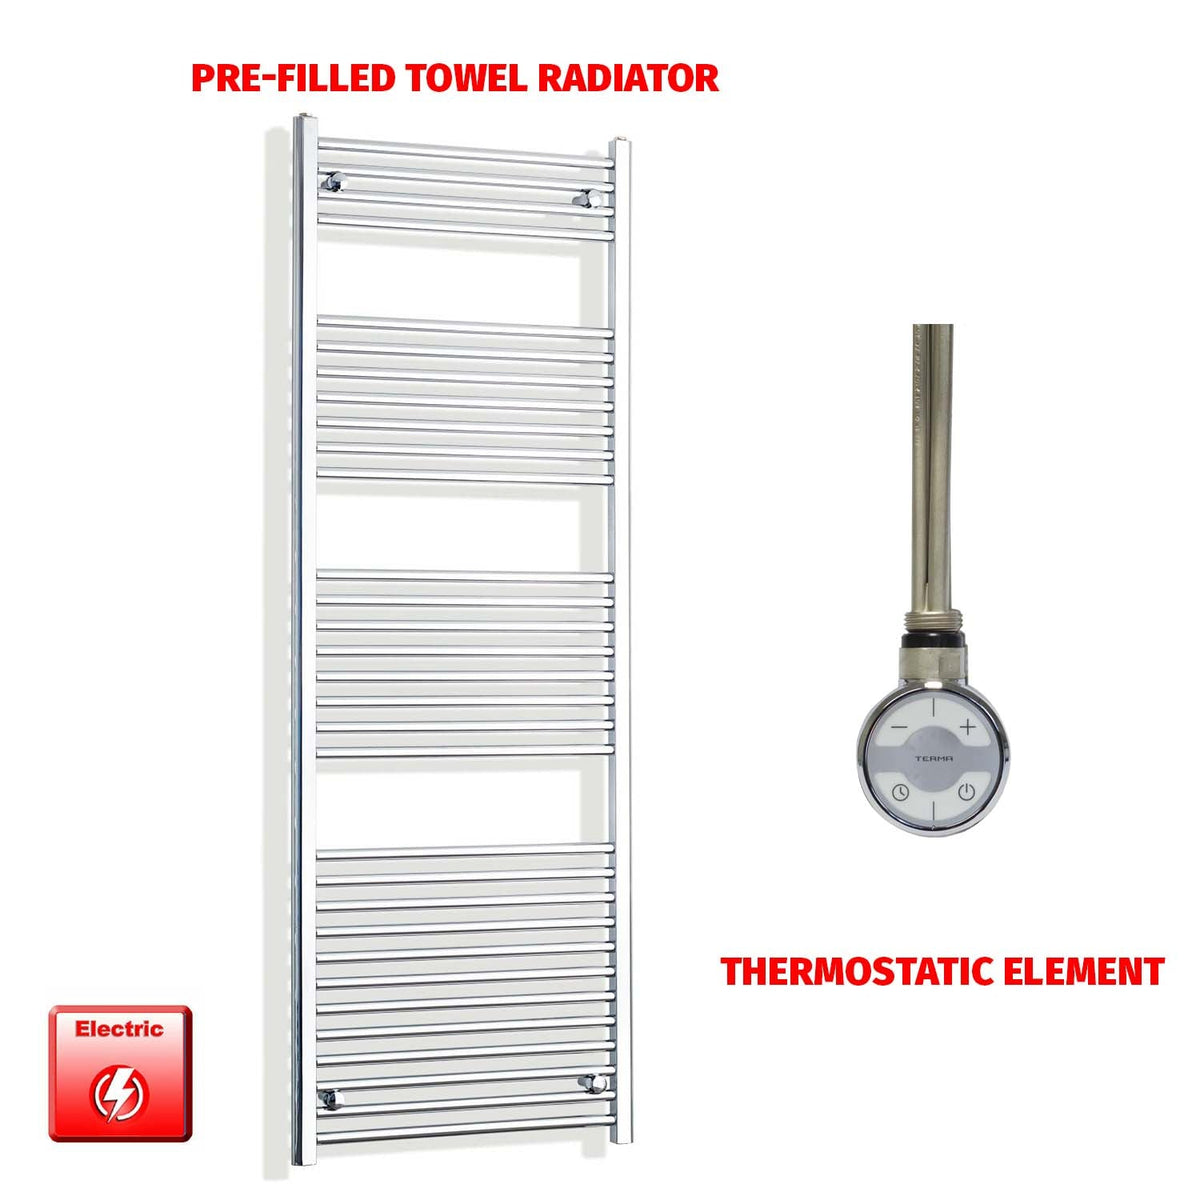 1800mm High 550mm Wide Electric Heated Towel Radiator Straight Chrome MOA Thermostatic element no timer